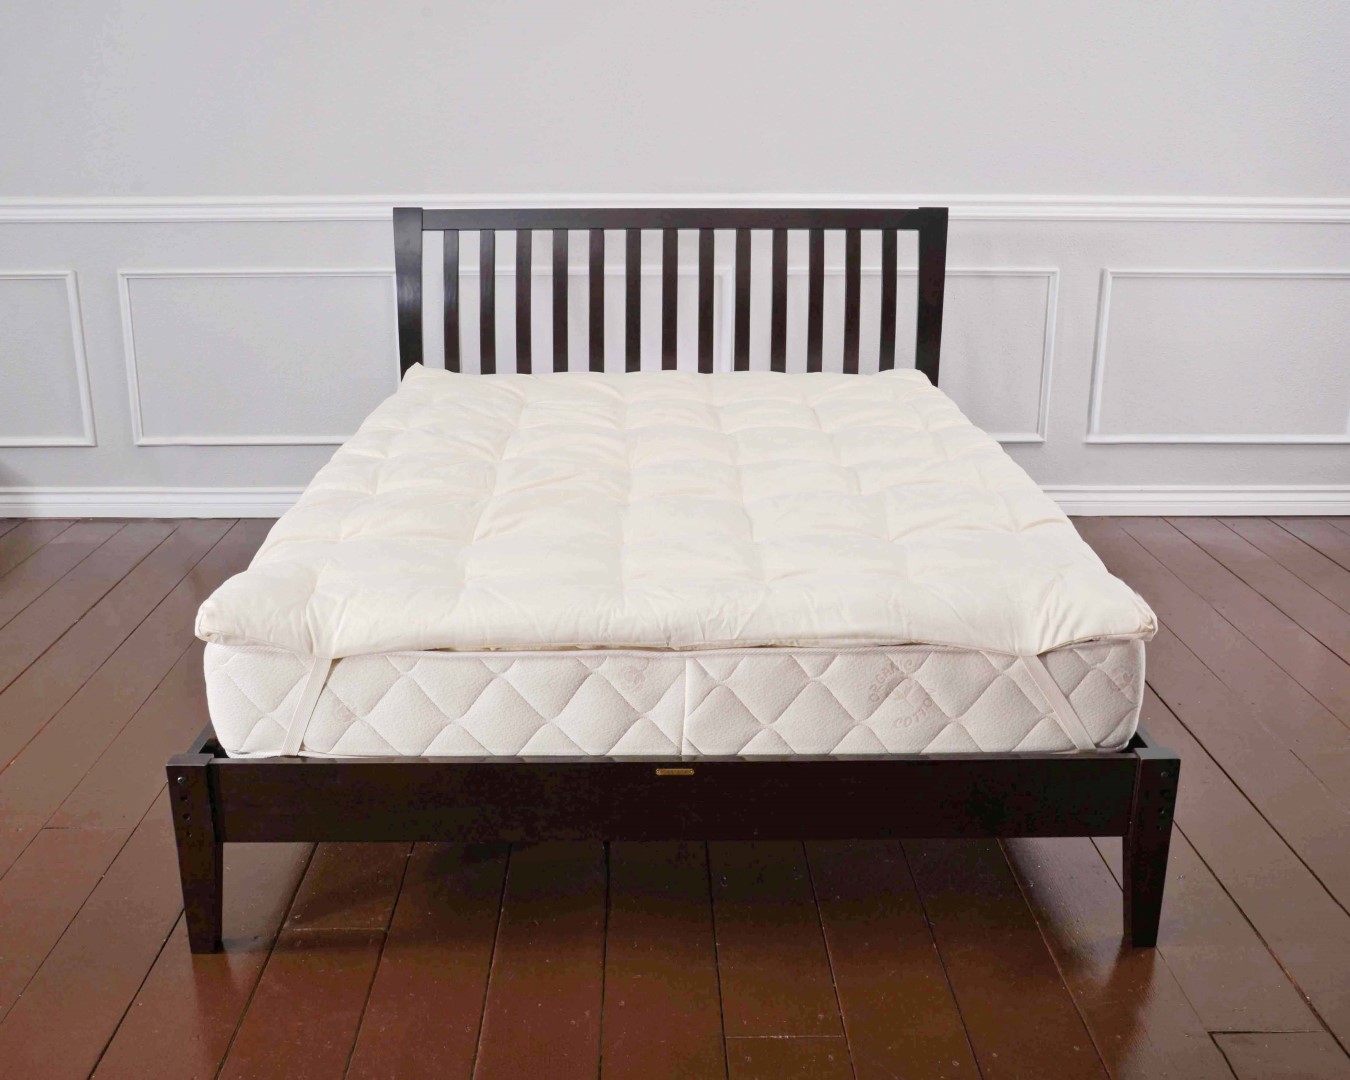 Natural Latex Mattress Topper Quilted with Organic Cotton and Wool